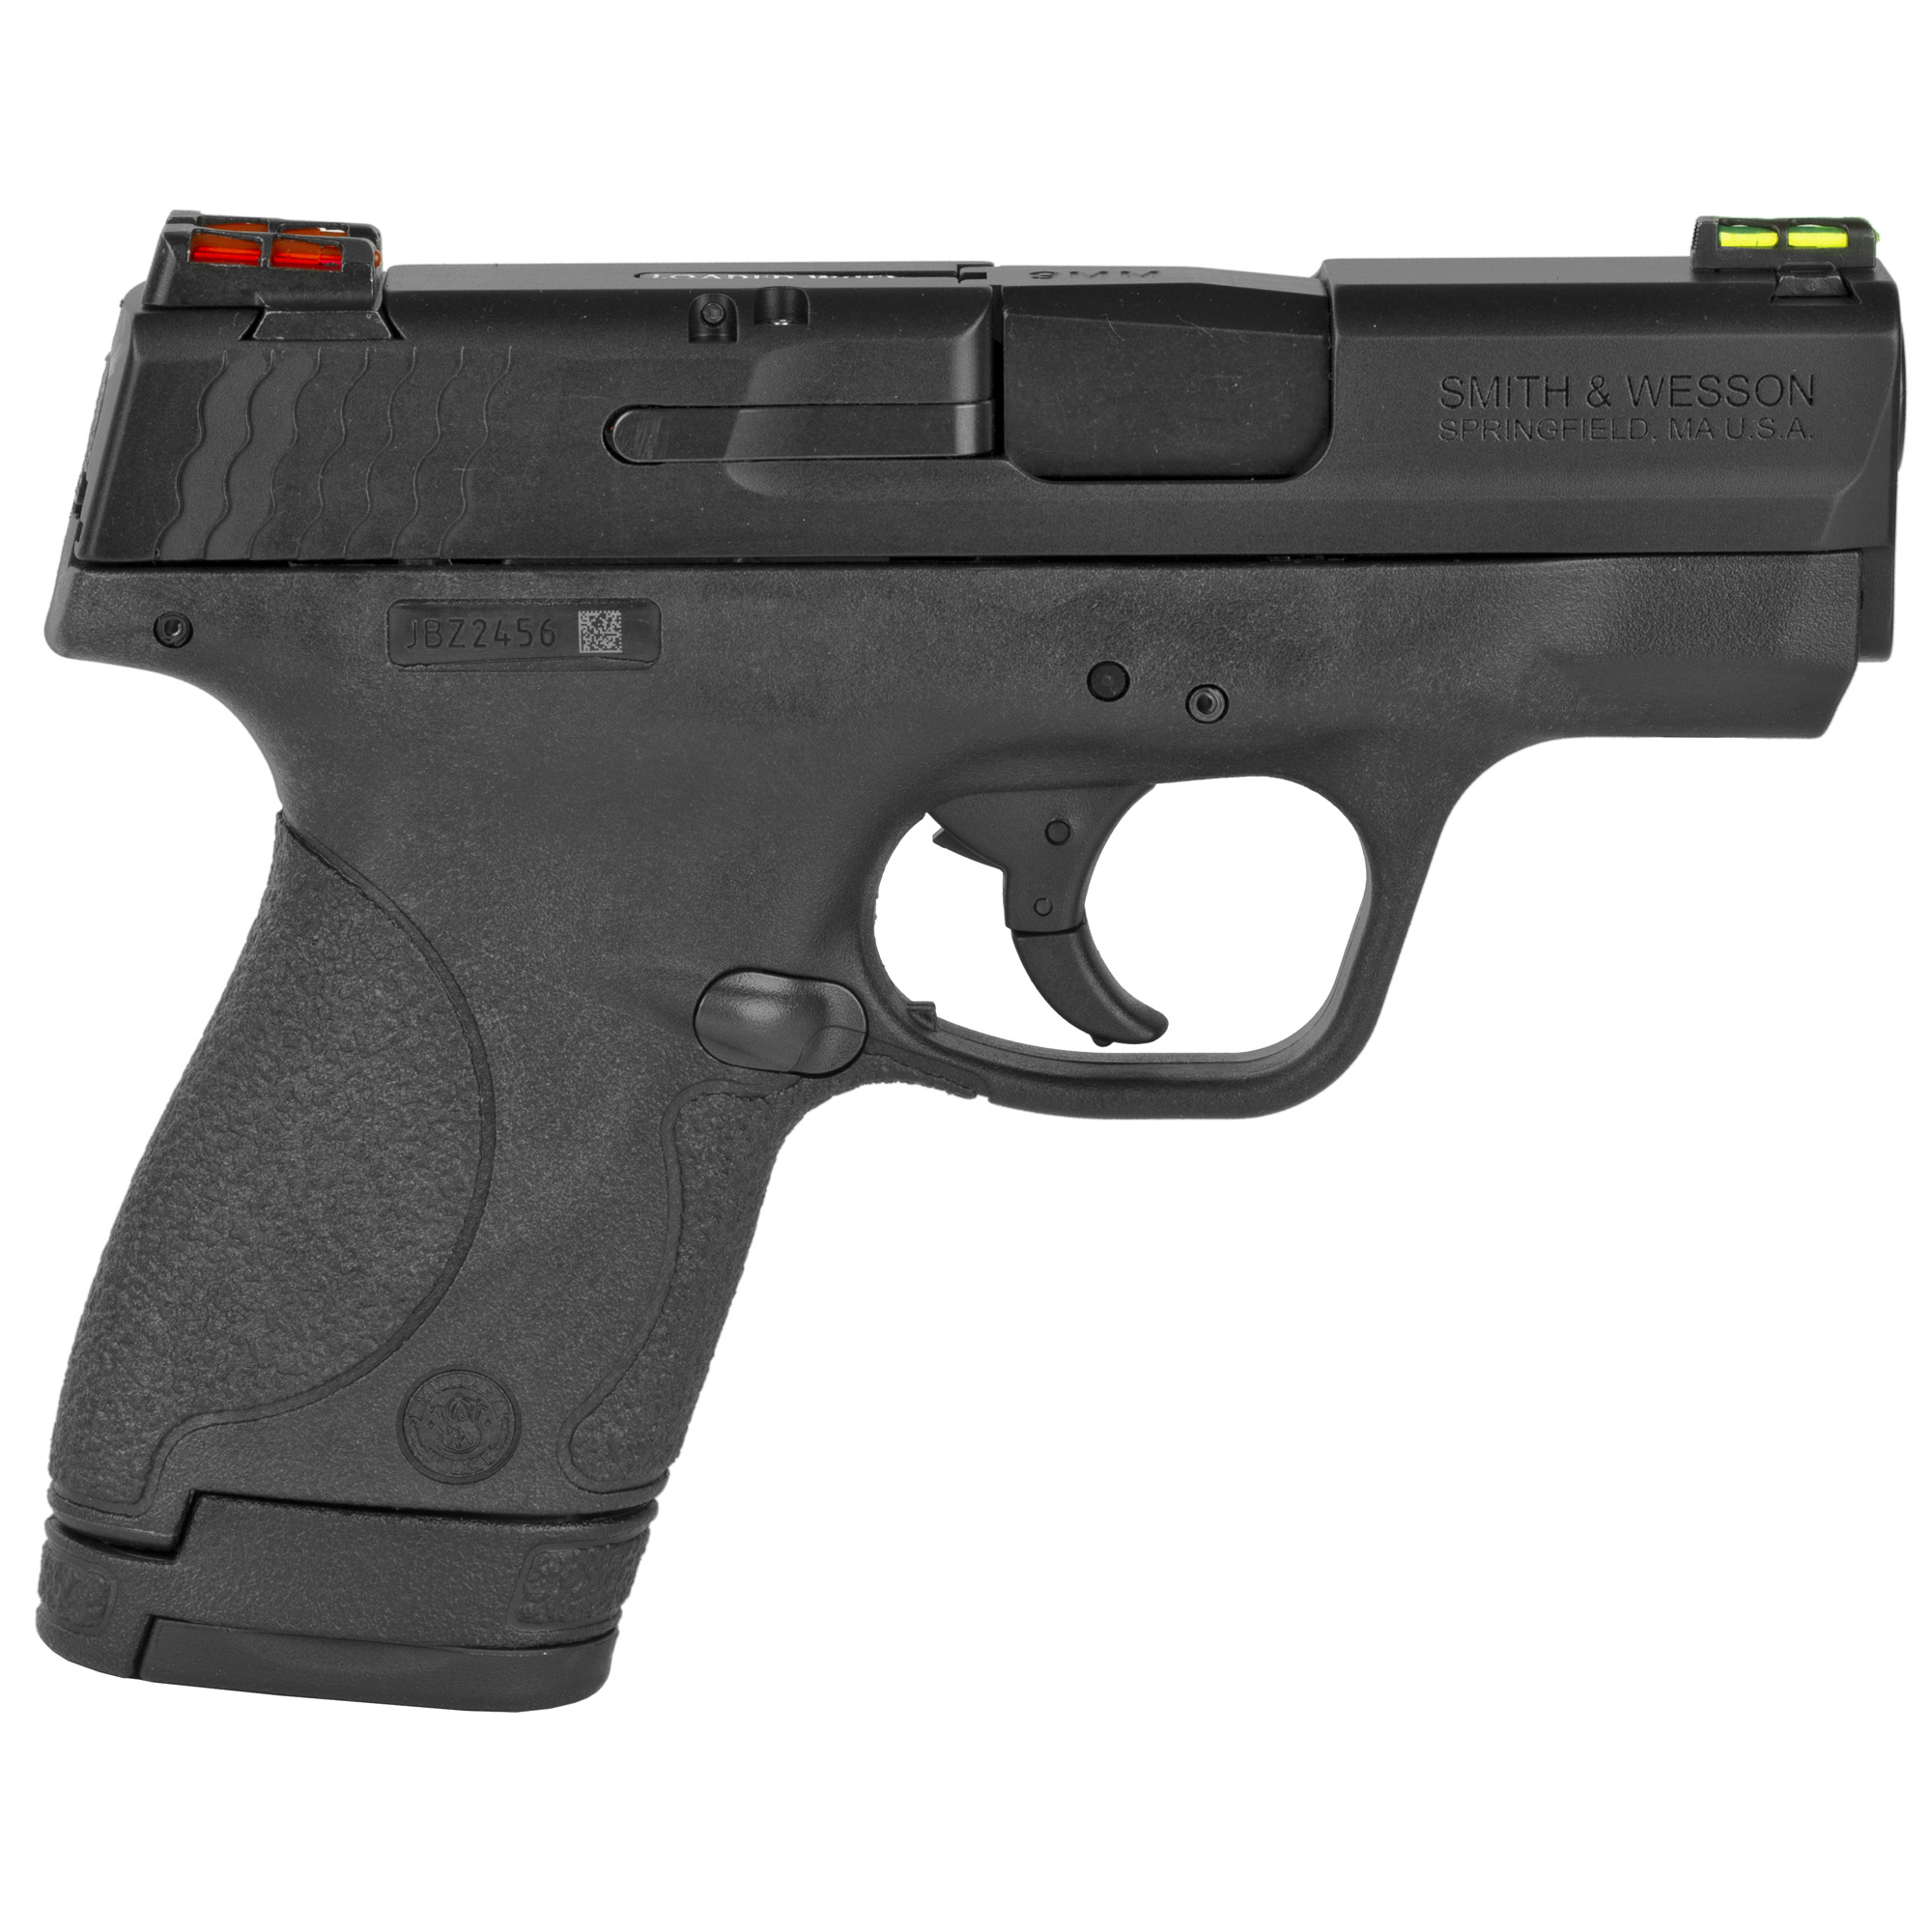 Smith & Wesson, M&P Shield, Striker Fired, Semi-automatic, Polymer Frame Pistol, Micro-Compact, 9MM, 3.1" Barrel, Armornite Finish, Black, HiViz Fiber Optic Sights, Manual Thumb Safety, 2 Magazines, (1) 7-Round and (1) 8-Round